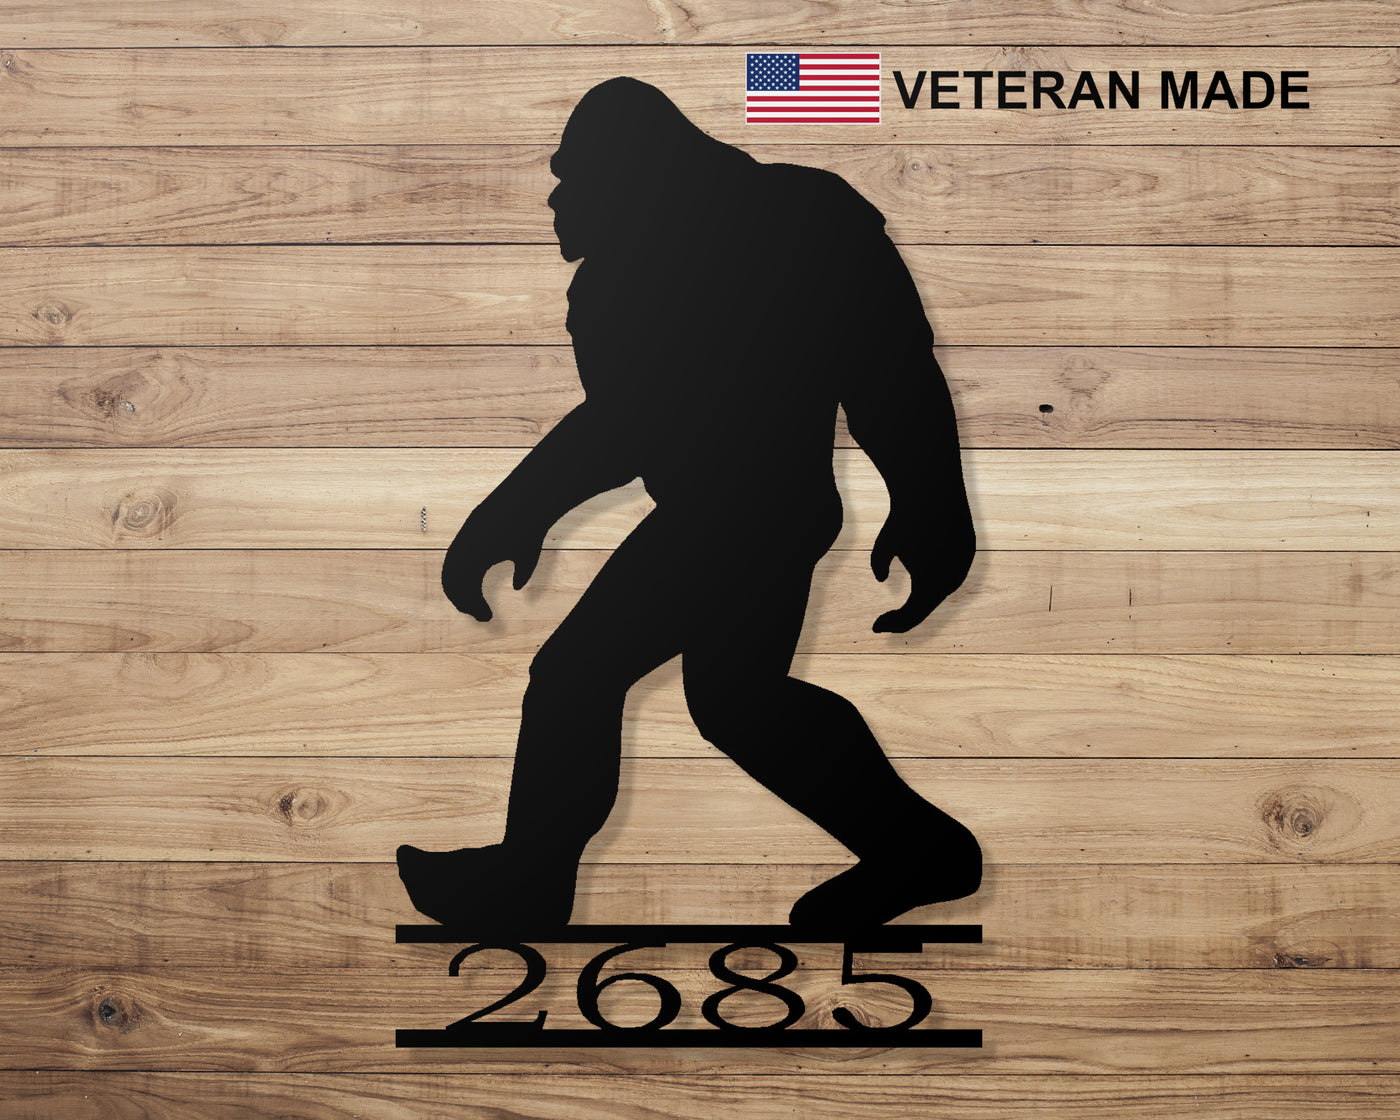 Personalized Bigfoot Metal Sign - Madison Iron and Wood - Personalized sign - metal outdoor decor - Steel deocrations - american made products - veteran owned business products - fencing decorations - fencing supplies - custom wall decorations - personalized wall signs - steel - decorative post caps - steel post caps - metal post caps - brackets - structural brackets - home improvement - easter - easter decorations - easter gift - easter yard decor